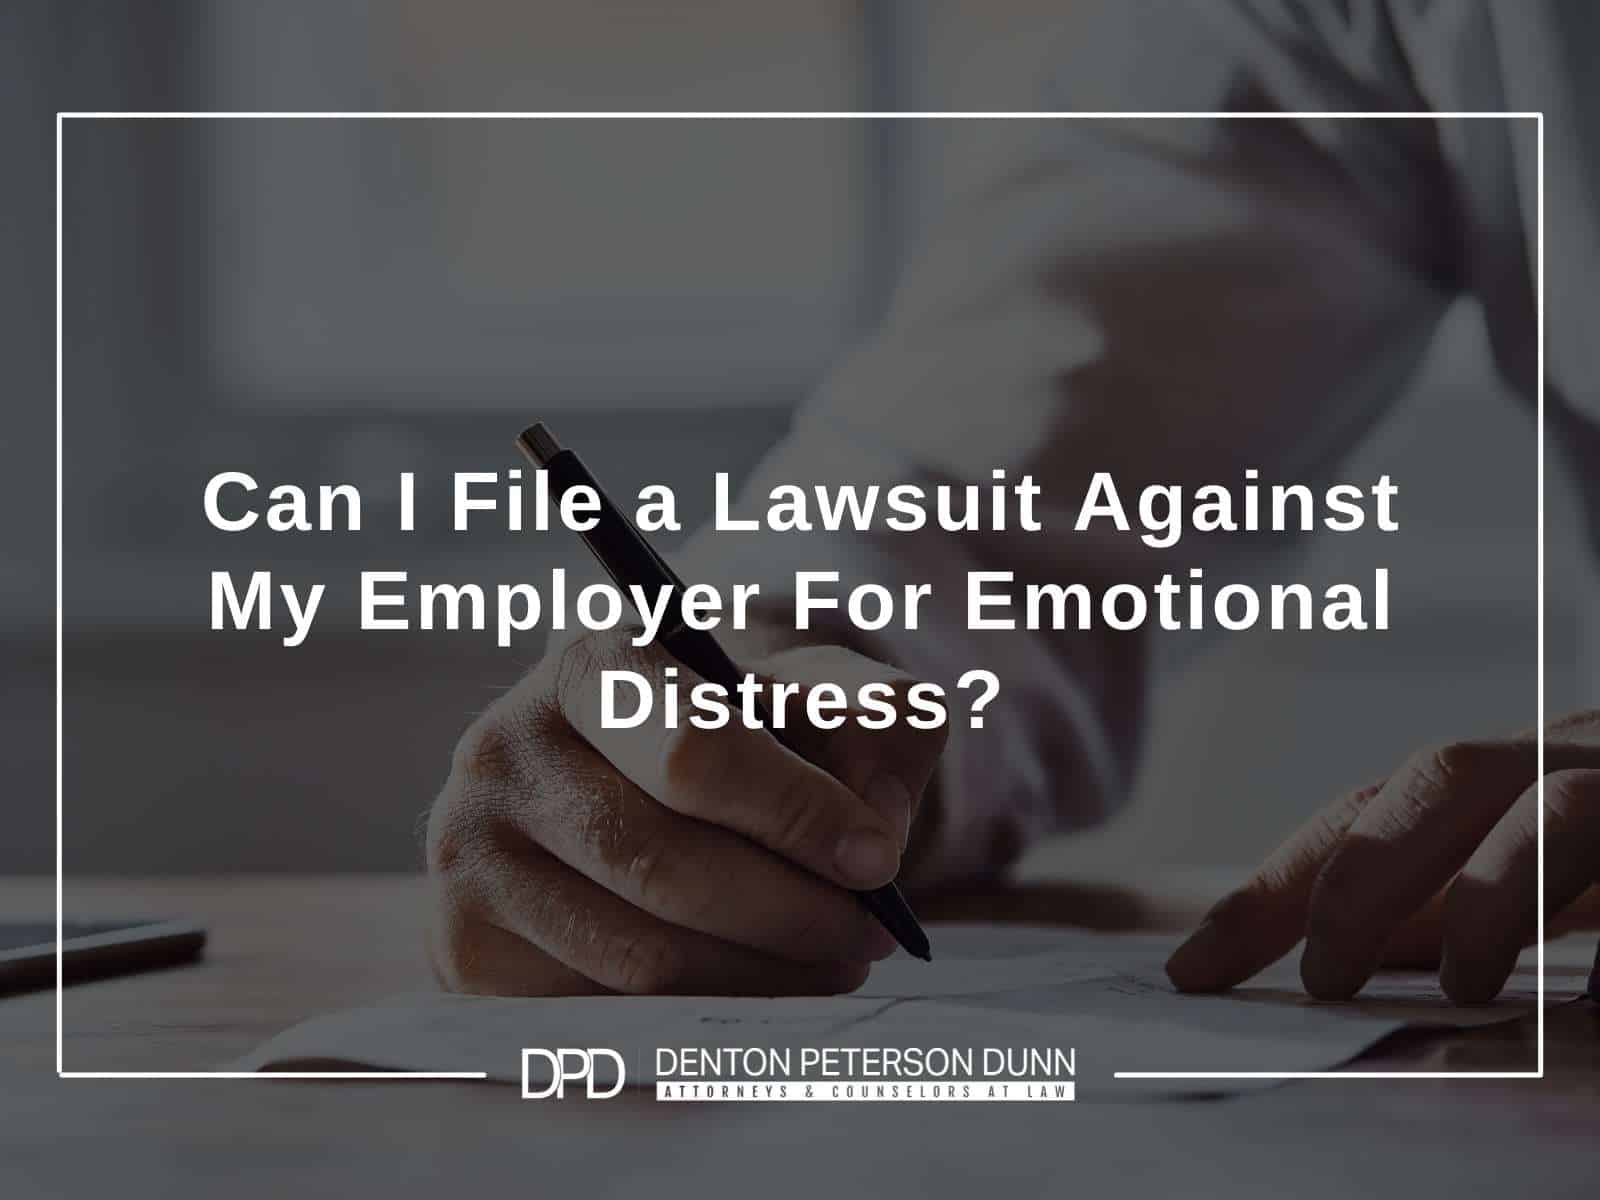 Can I File a Lawsuit Against My Employer For Emotional Distress?